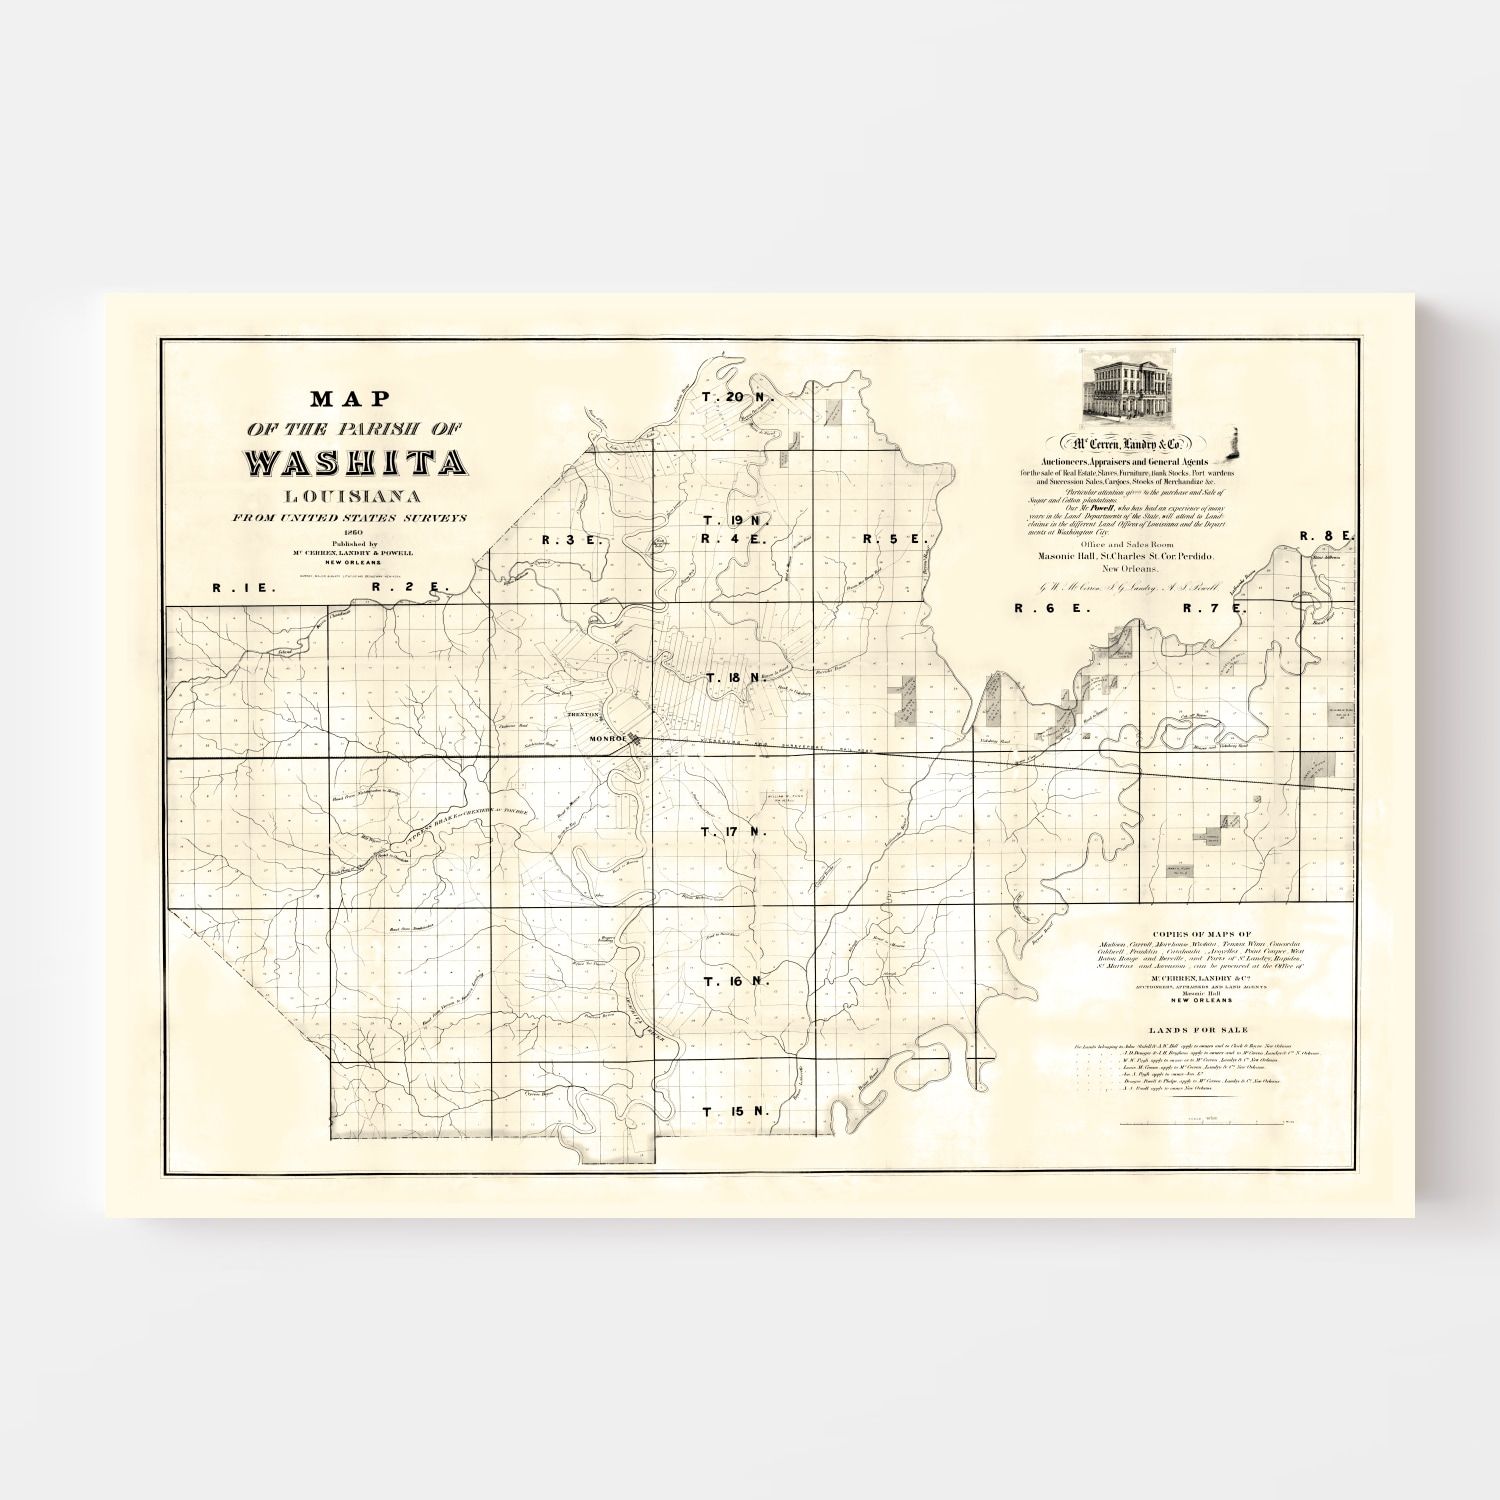  Historic Map : 1817 Louisiana. - Vintage Wall Art - 69in x  44in: Posters & Prints